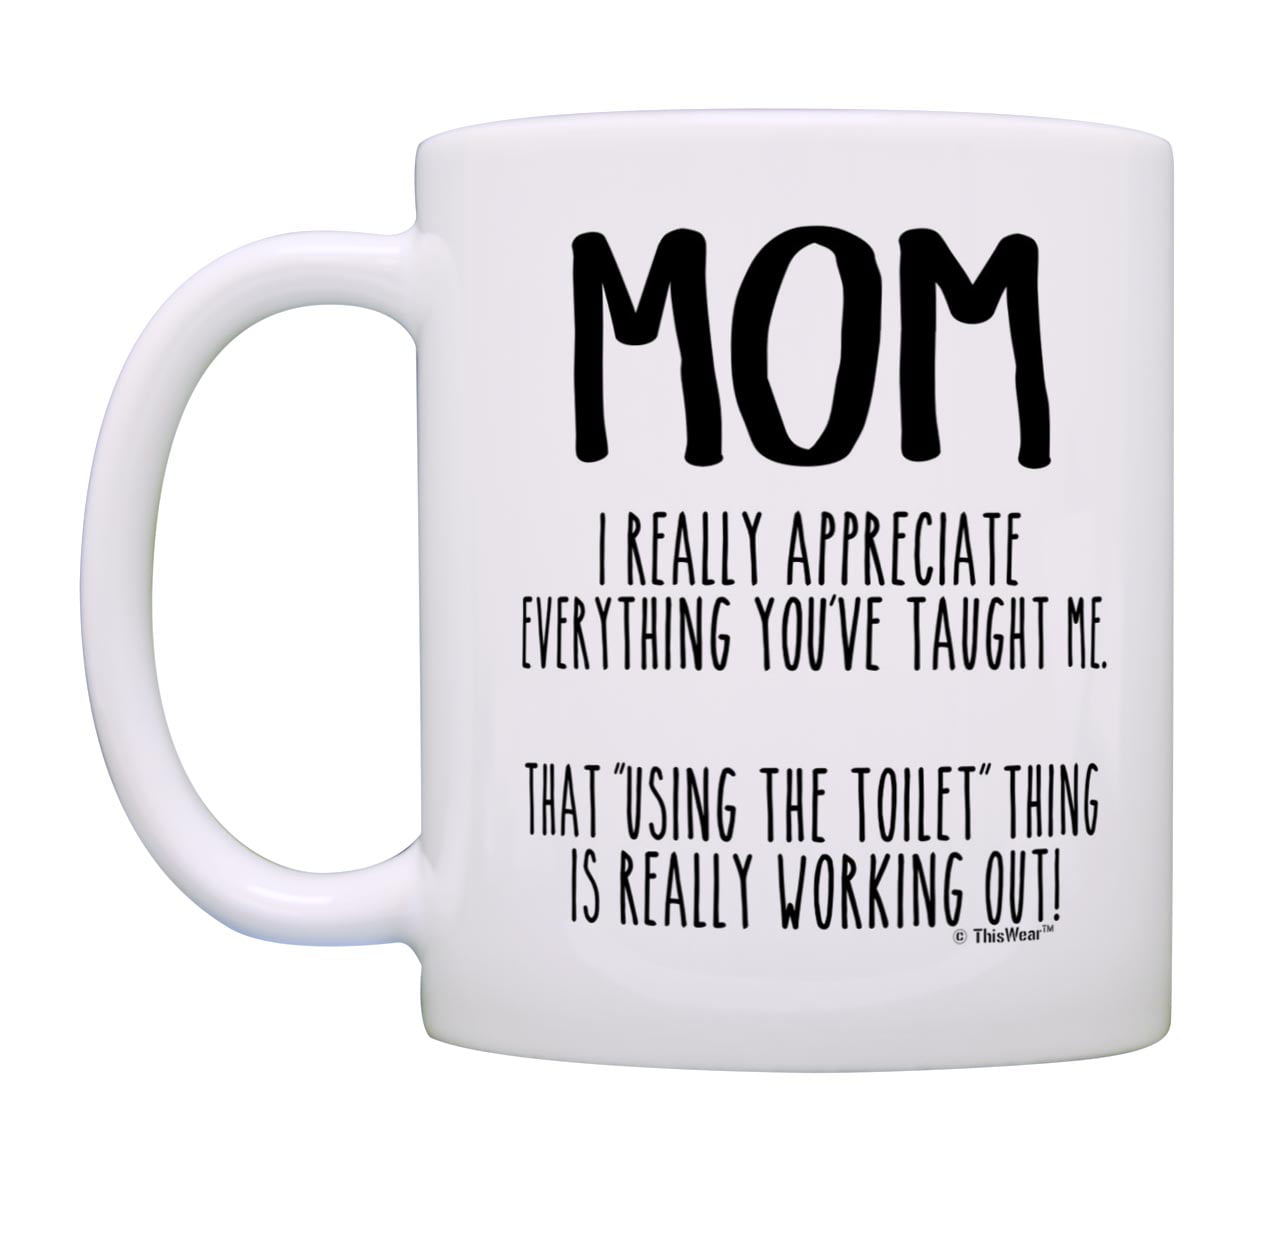 Today's Menu: Eat It Or Starve Funny Cooking Related Quotes Ceramic Coffee  & Tea Gift Mug, Kitchen Stuff, Cook's Things & Cup Birthday Gifts For Home  Cook Mom, Aunt, Grandma, Wife 